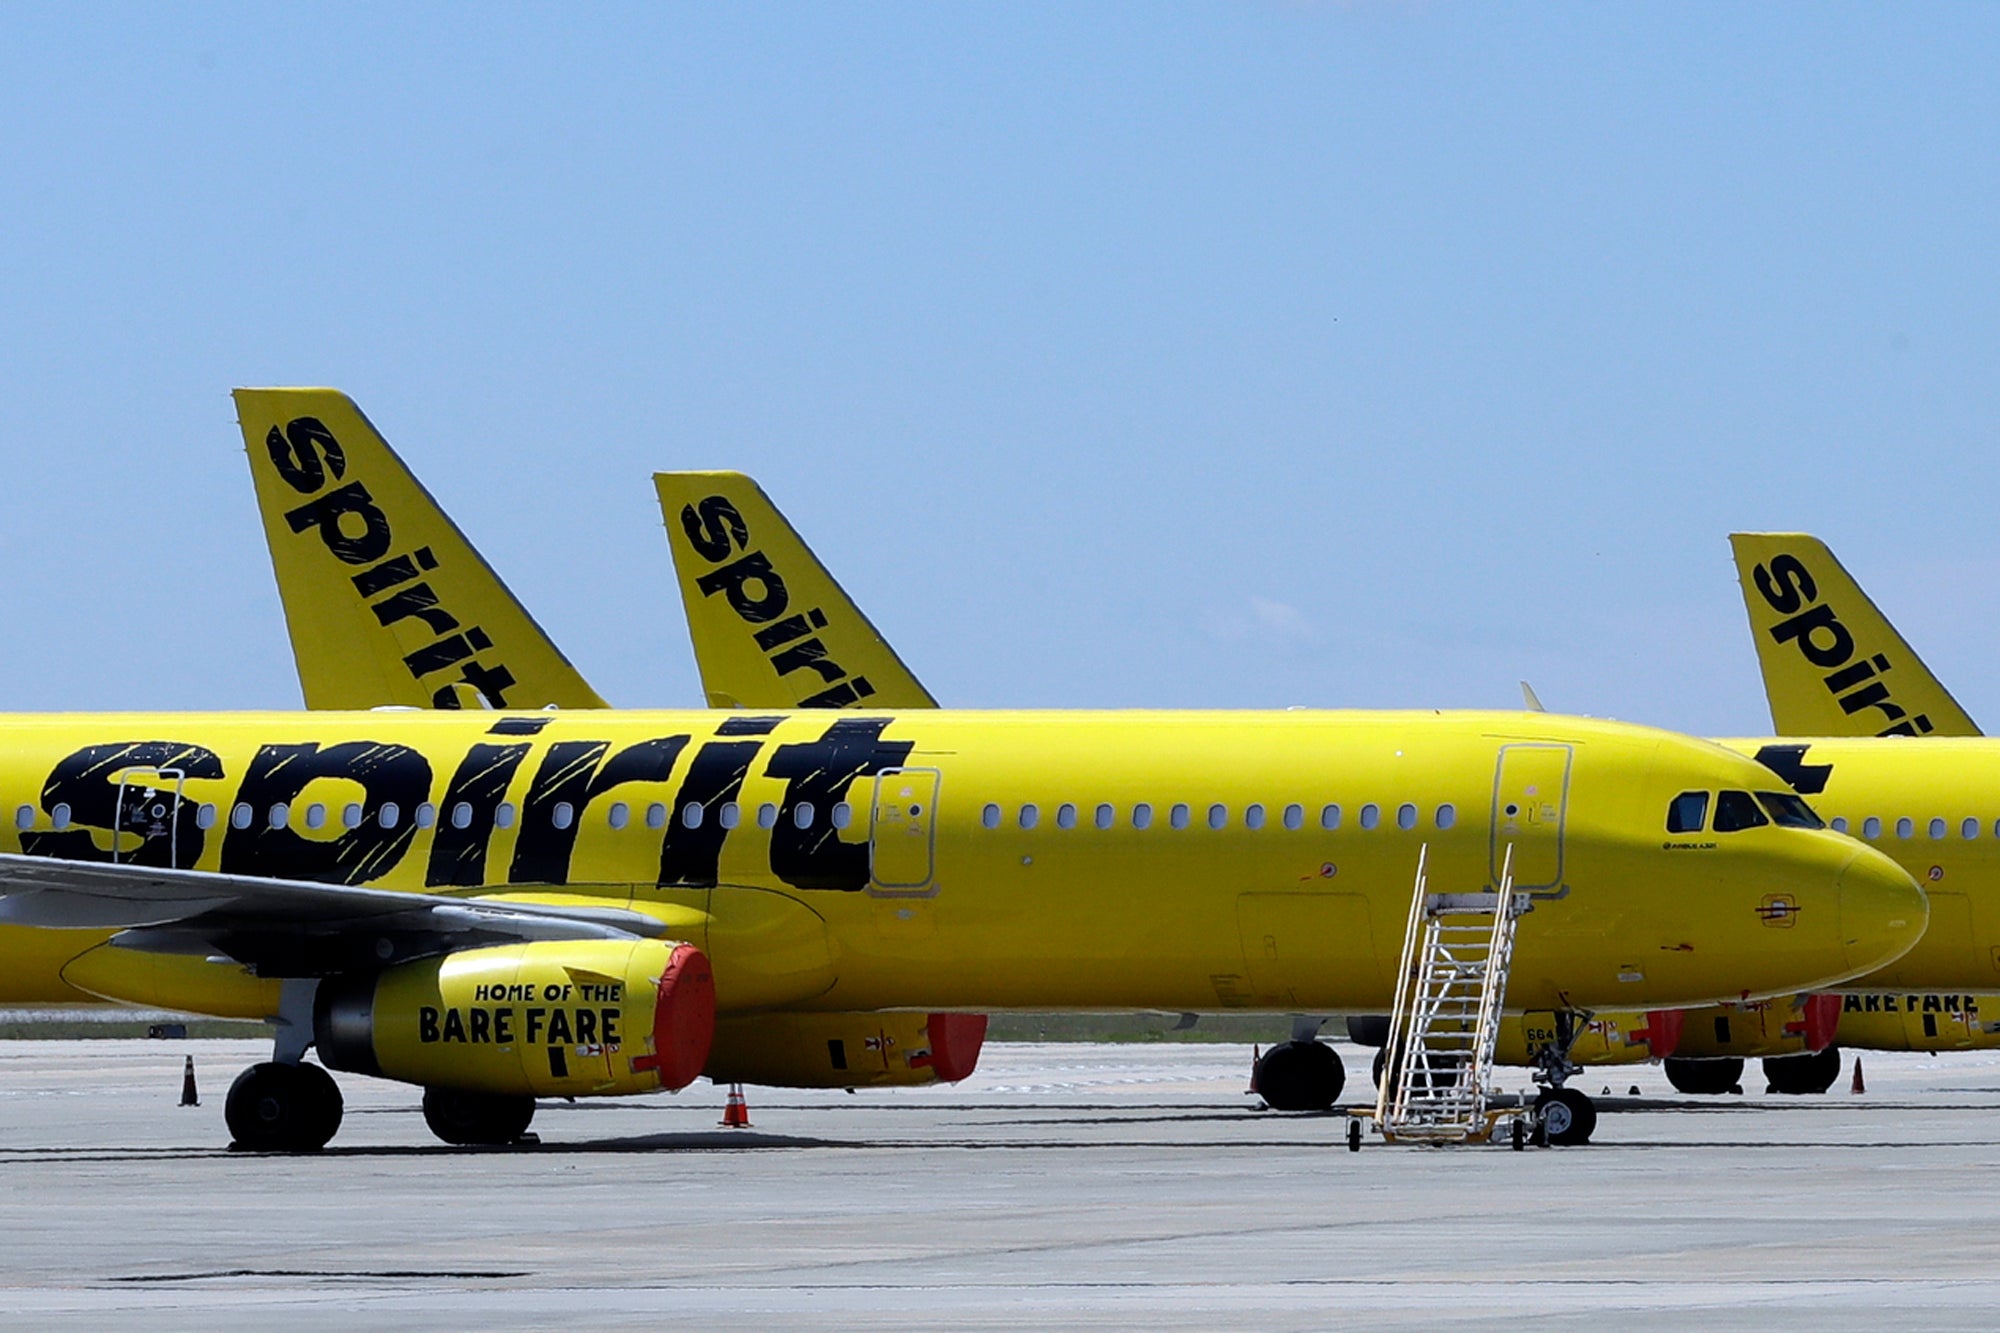 Chelsia Blackmon has said Spirit Airlines showed ‘reckless disregard’ for her civil rights